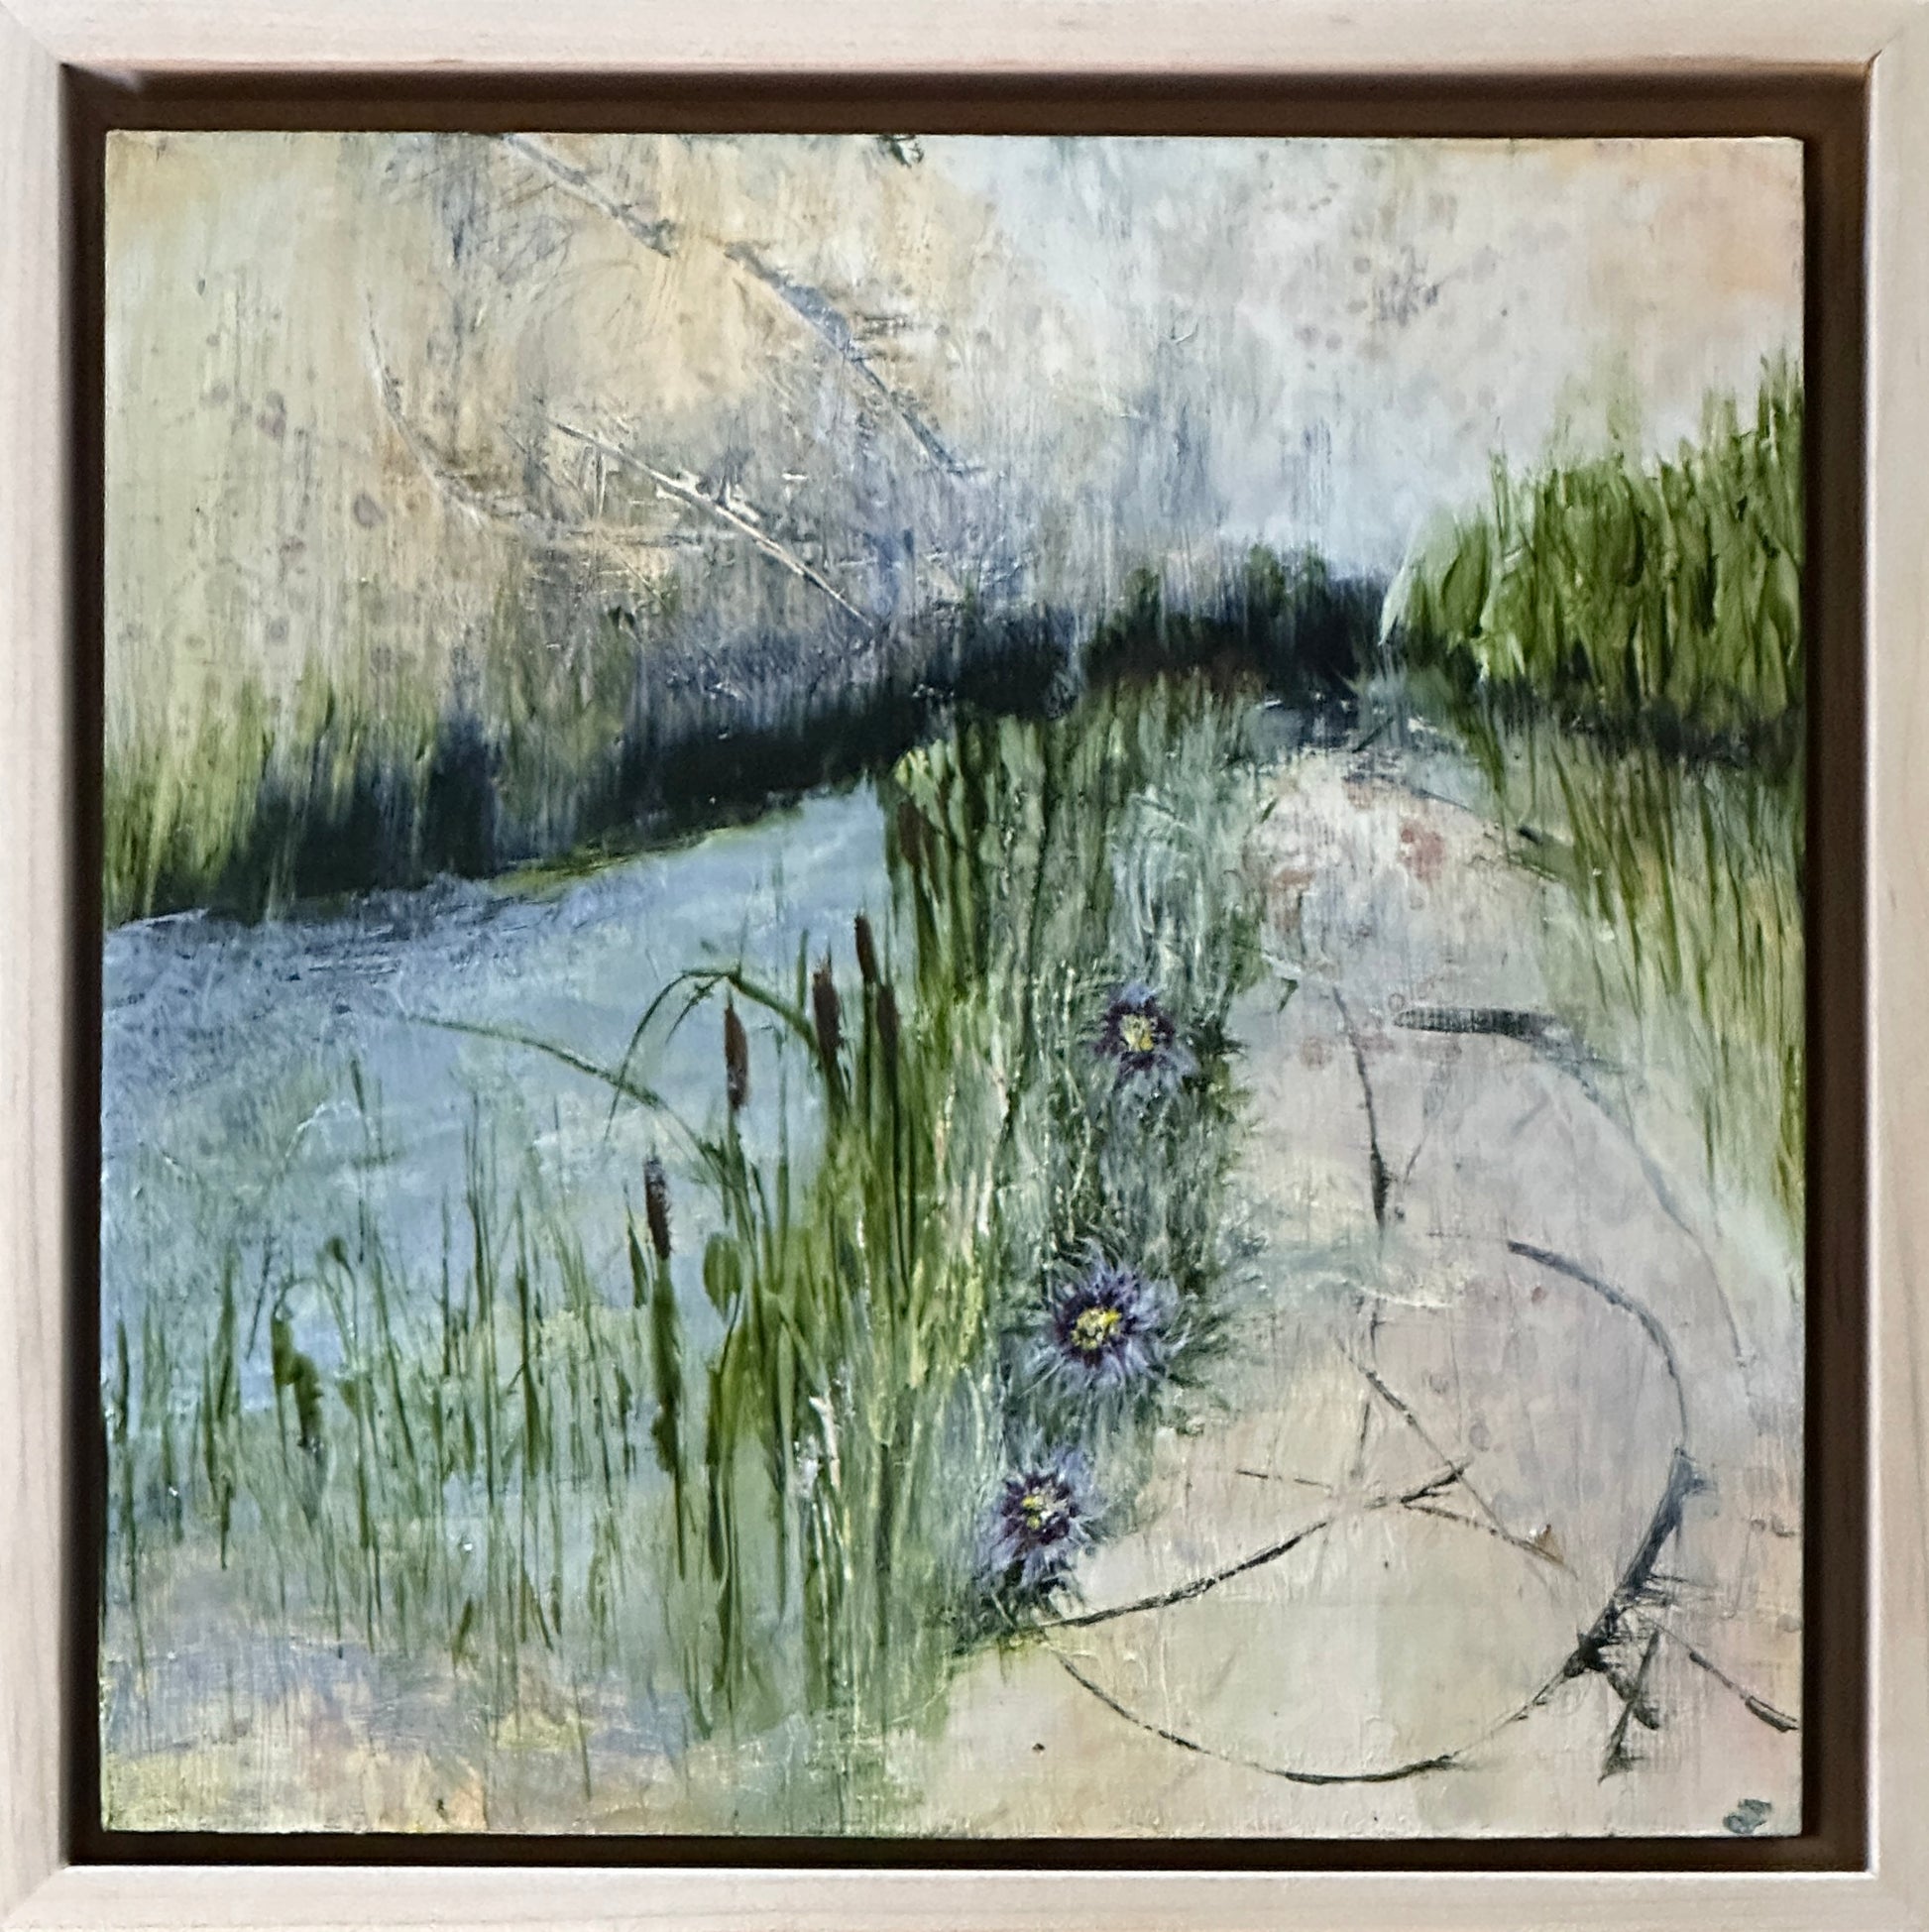 8 x 8 x 1.5-inch , framed, impression of cattails and passion flowers along the edge of a river.  Acrylic painting on cradled panel with natural wood frame.  By Cumming, GA artist, Juanita Bellavance. Part of our 25 Days of Minis 2022 collection.  Collect them all!